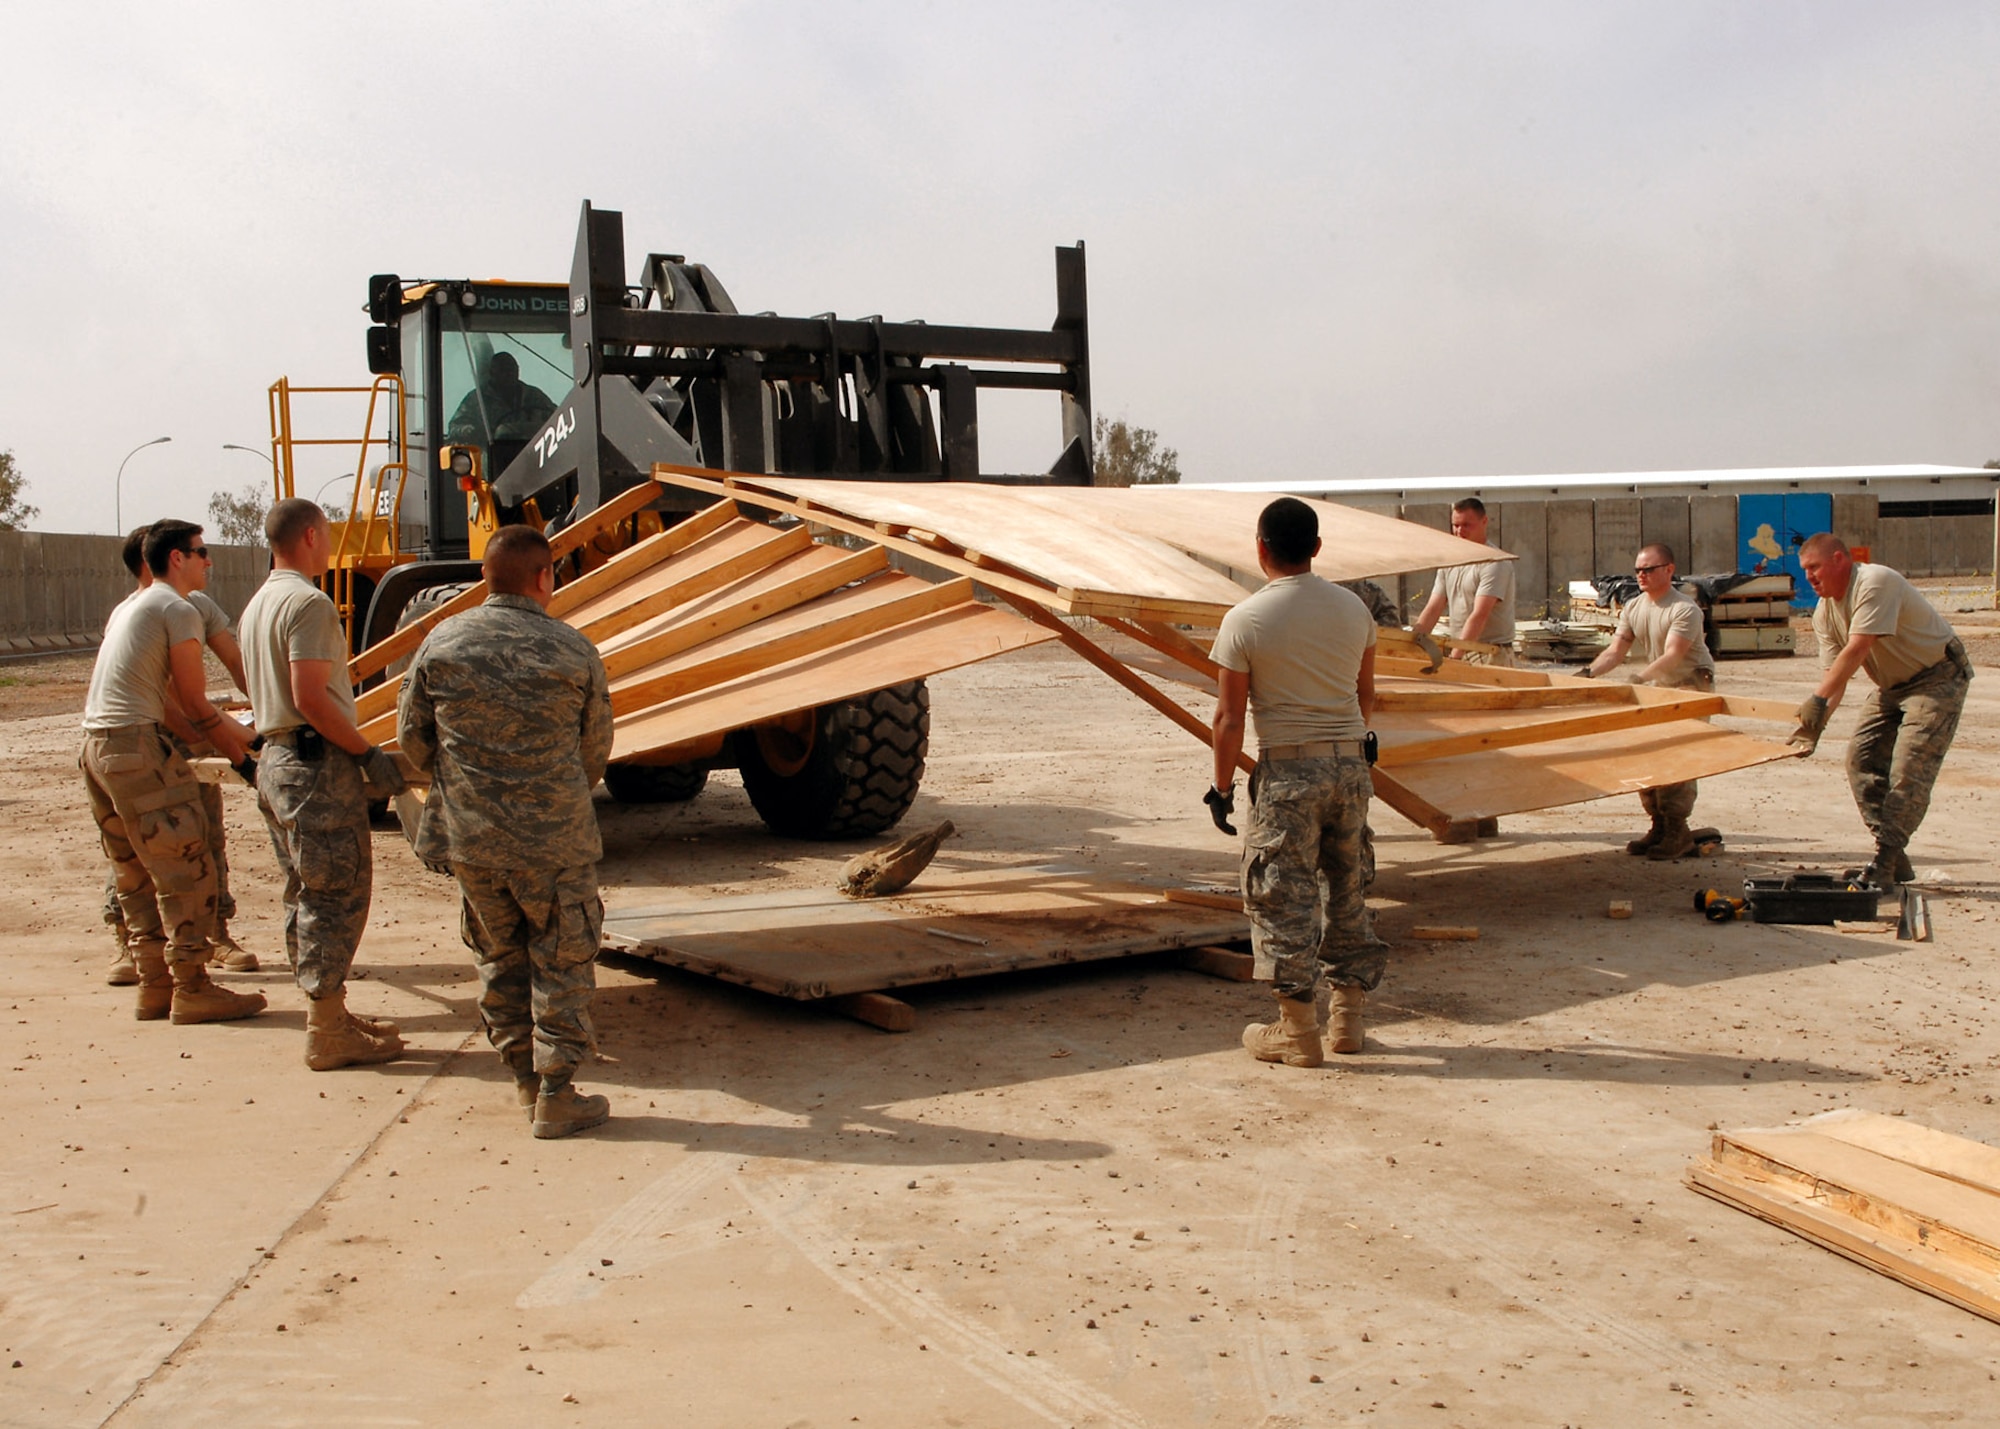 Members of the 332nd Expeditionary Civil Engineer Squadron pull apart the entry way of the old Air Force Theater Hospital emergency room tent Feb. 29 at Balad Air Base, Iraq. The entry will be shipped to the National Museum of Health and Medicine in Washington as part of an exhibit. The tent is slated for exhibition because it is known, by the medical community, as the place where the most American blood was spilled since the Vietnam War. (U.S. Air Force photo/Senior Airman Julianne Showalter) 